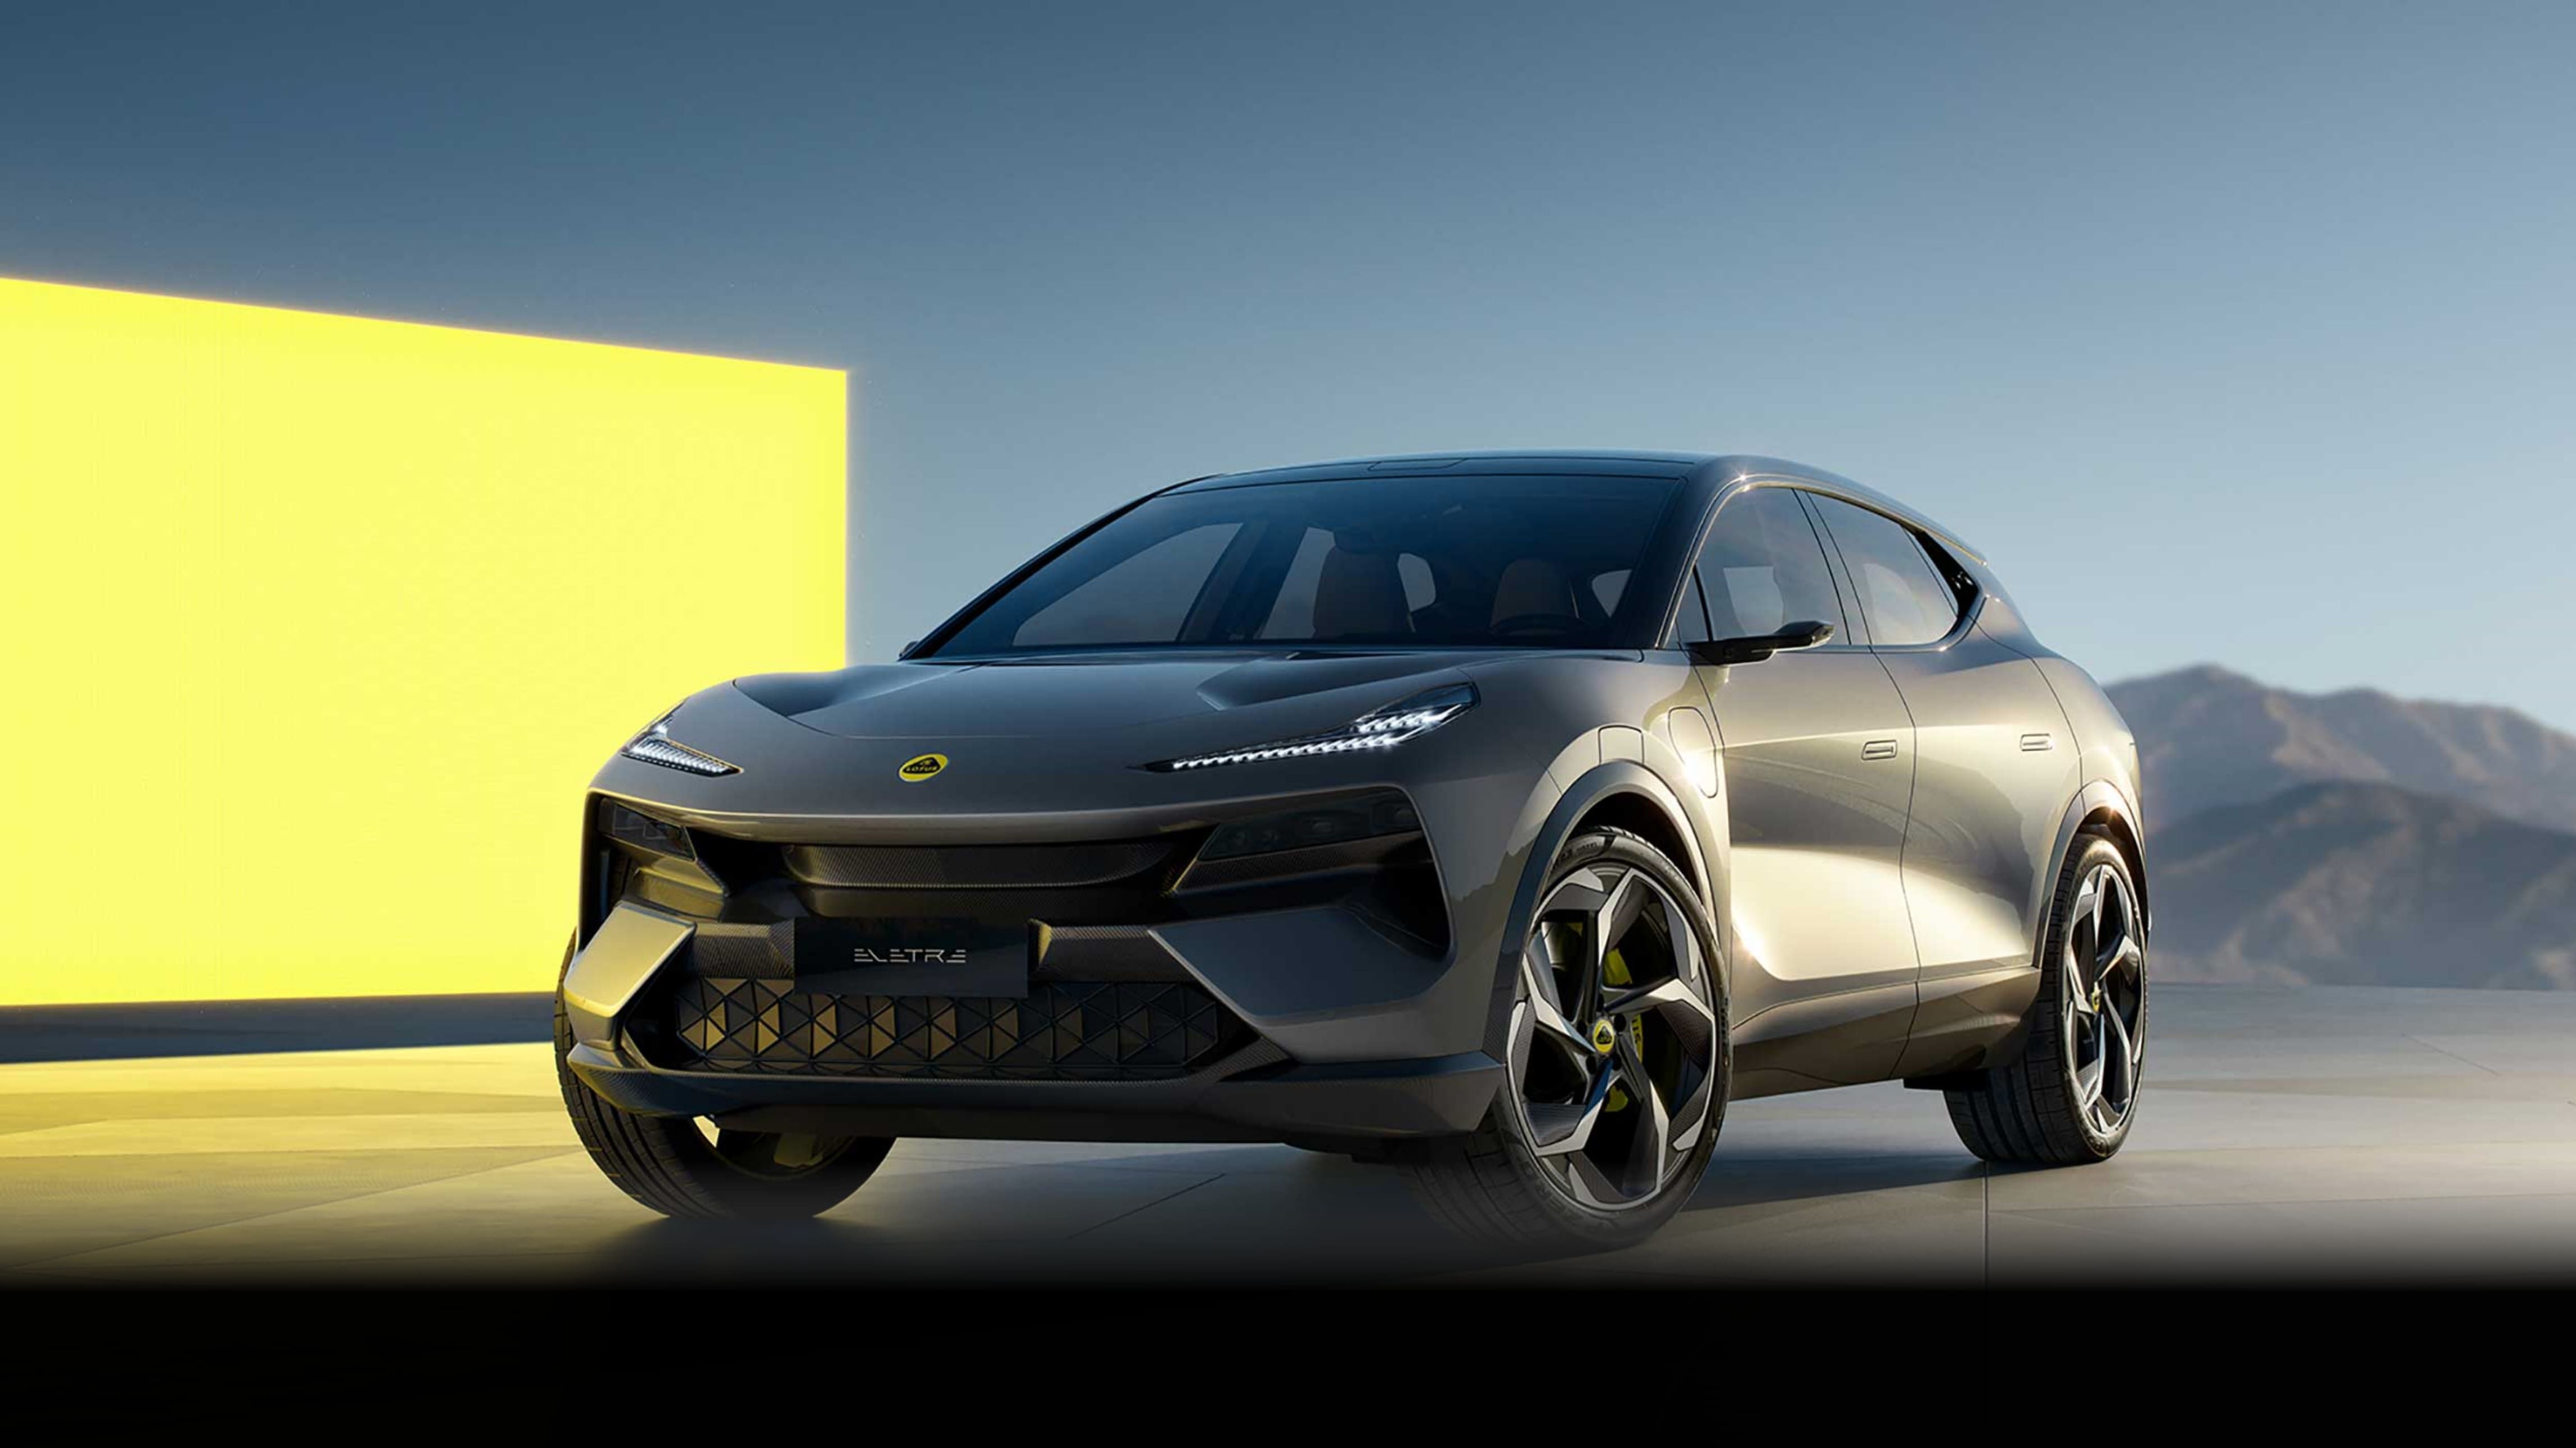 Lotus Orlando is proud to offer a wide selection of Lotus Eletre, including the white lotus. If you're looking for high-quality, stylish, and affordable battery electric vehicles near Orlando, FL, contact us today!